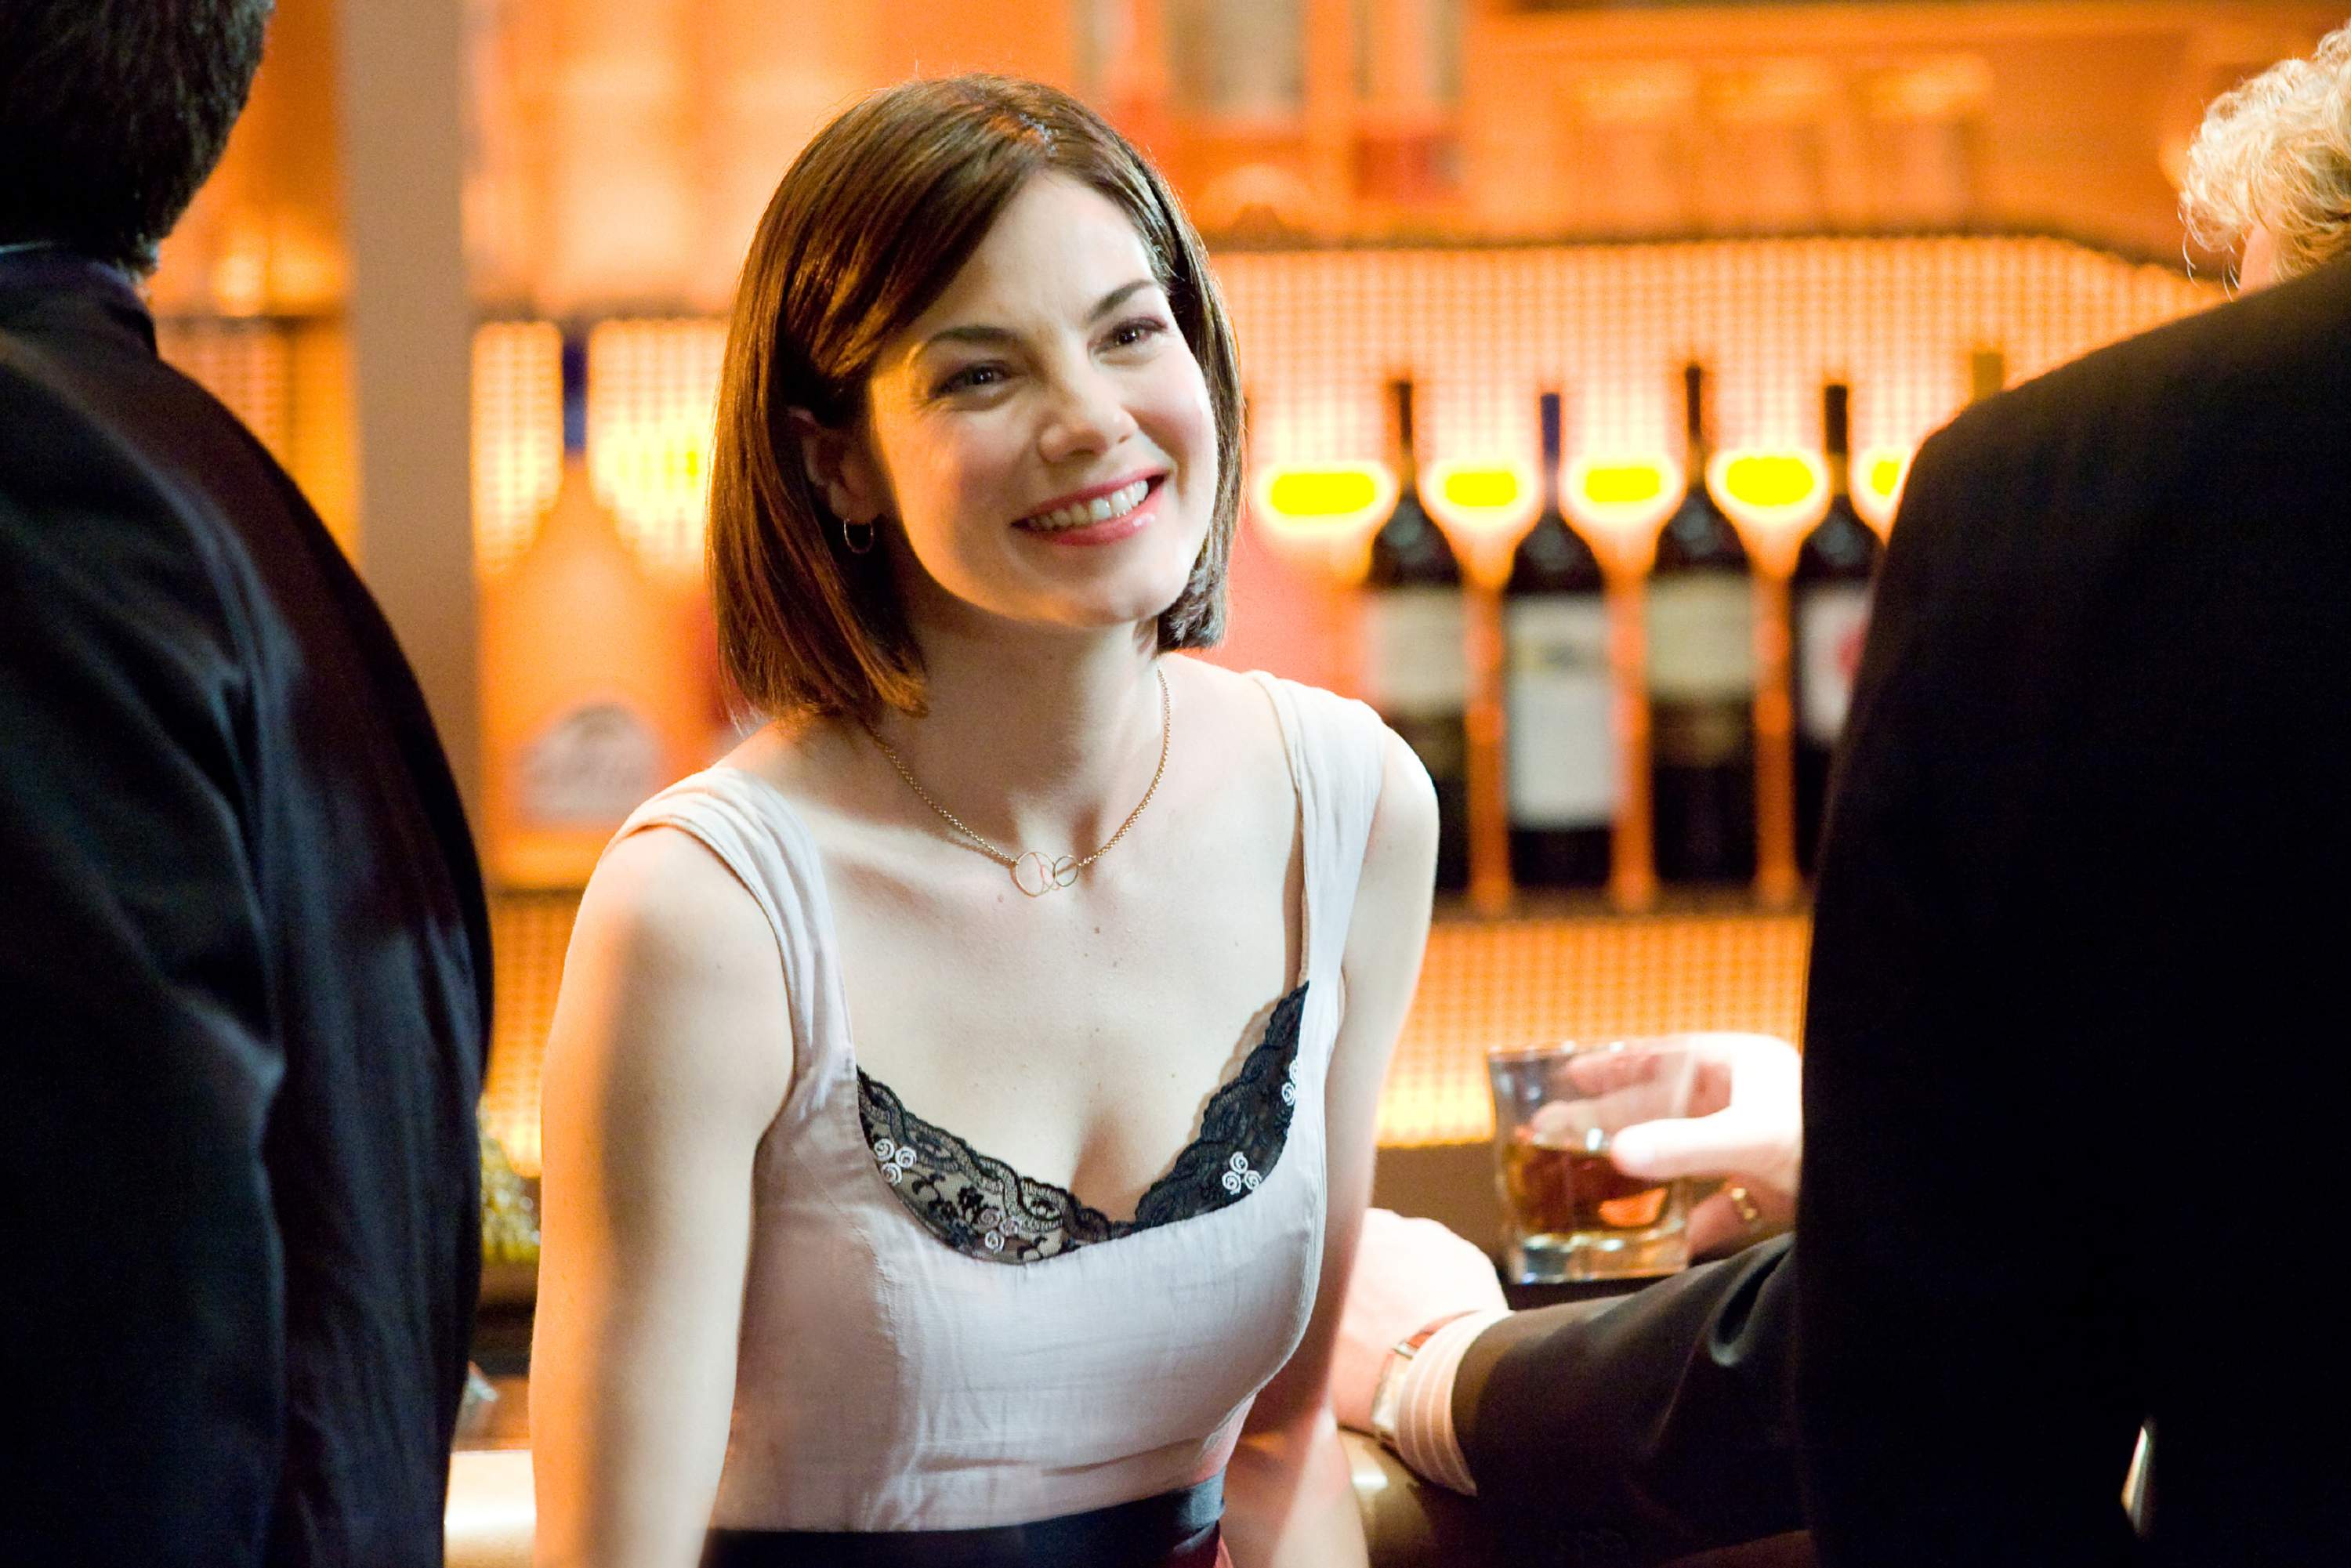 Michelle Monaghan as Hannah in Columbia Pictures' Made of Honor (2008). Photo credit: Peter Iovino.